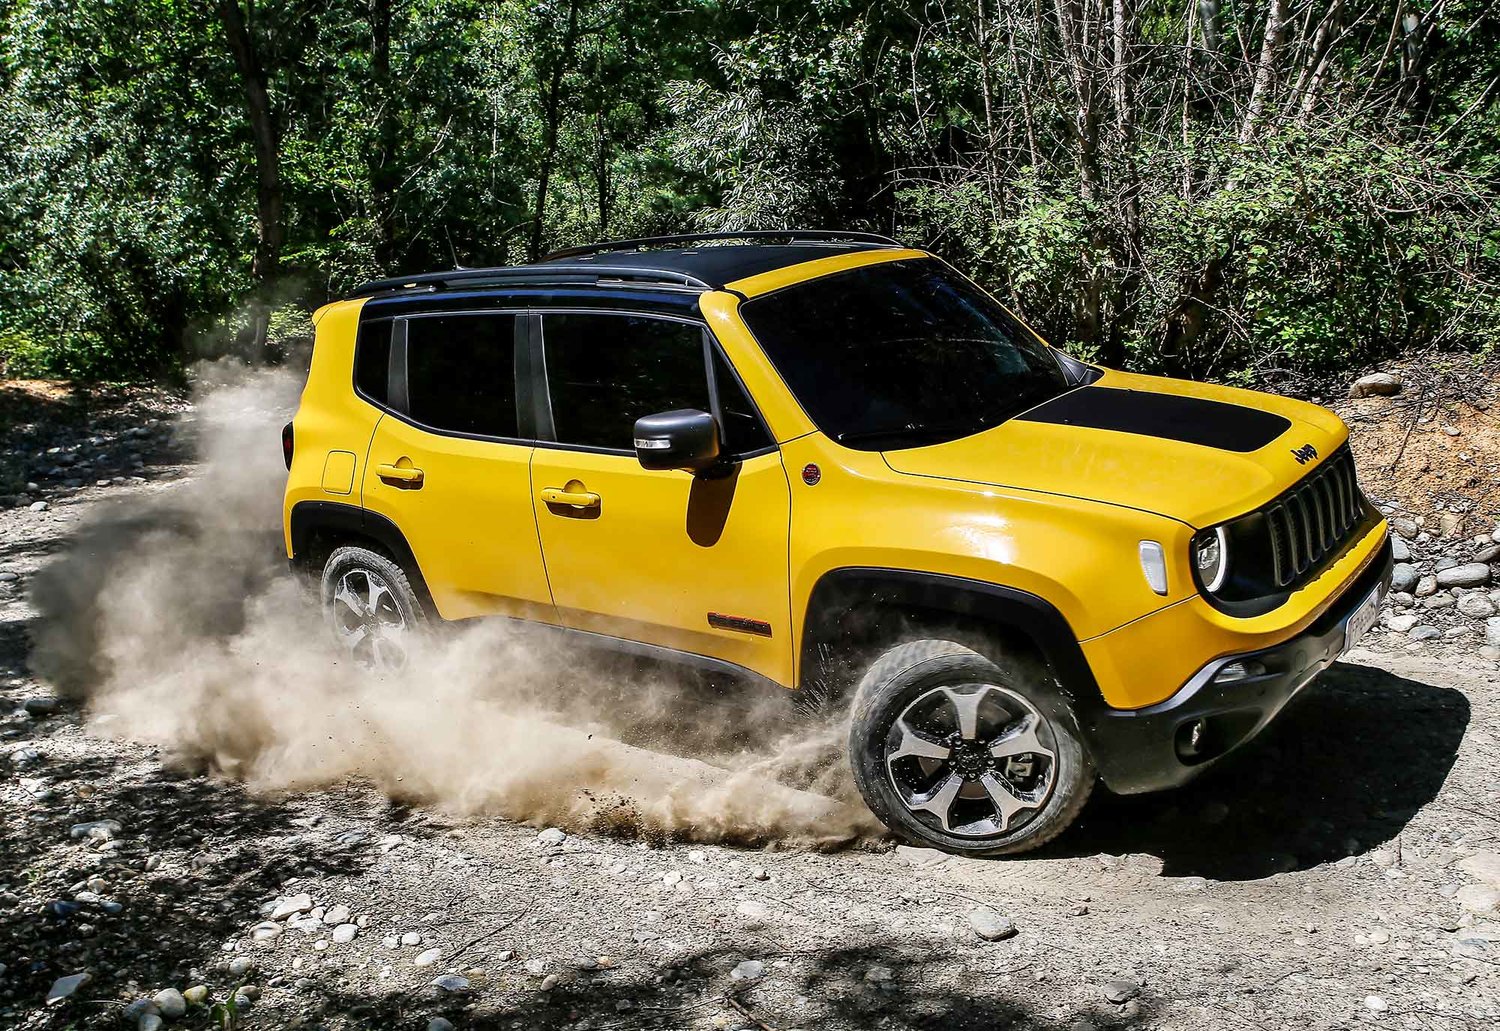 2019 Jeep Renegade Trailhawk First Test Review: On- and Off-Road